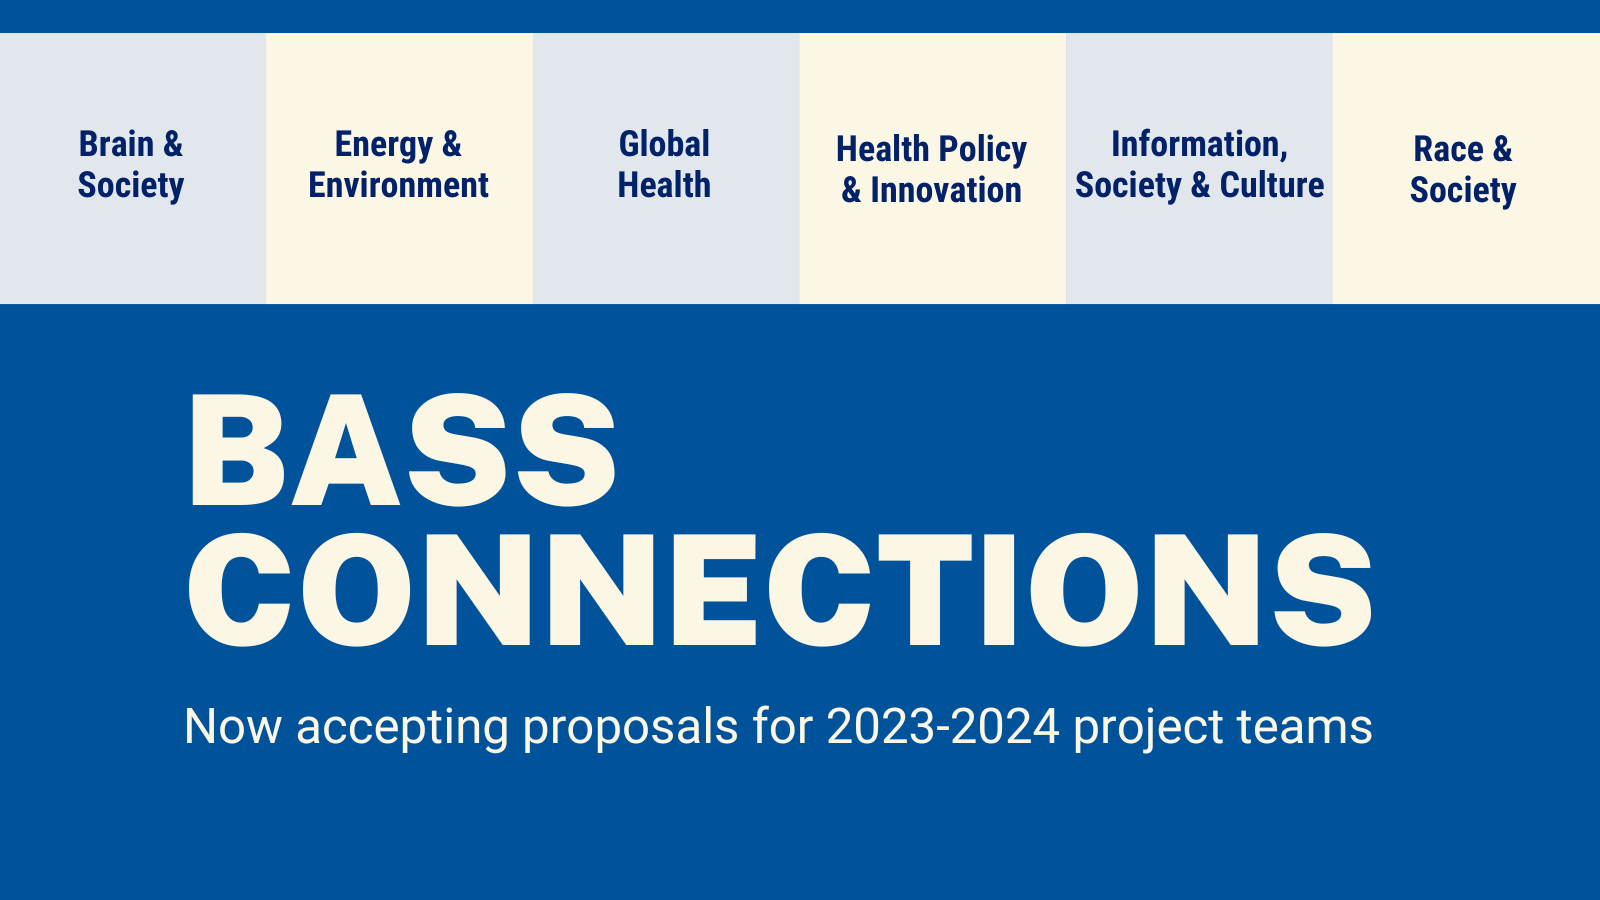 Now accepting proposals for 2023-2024 project teams.